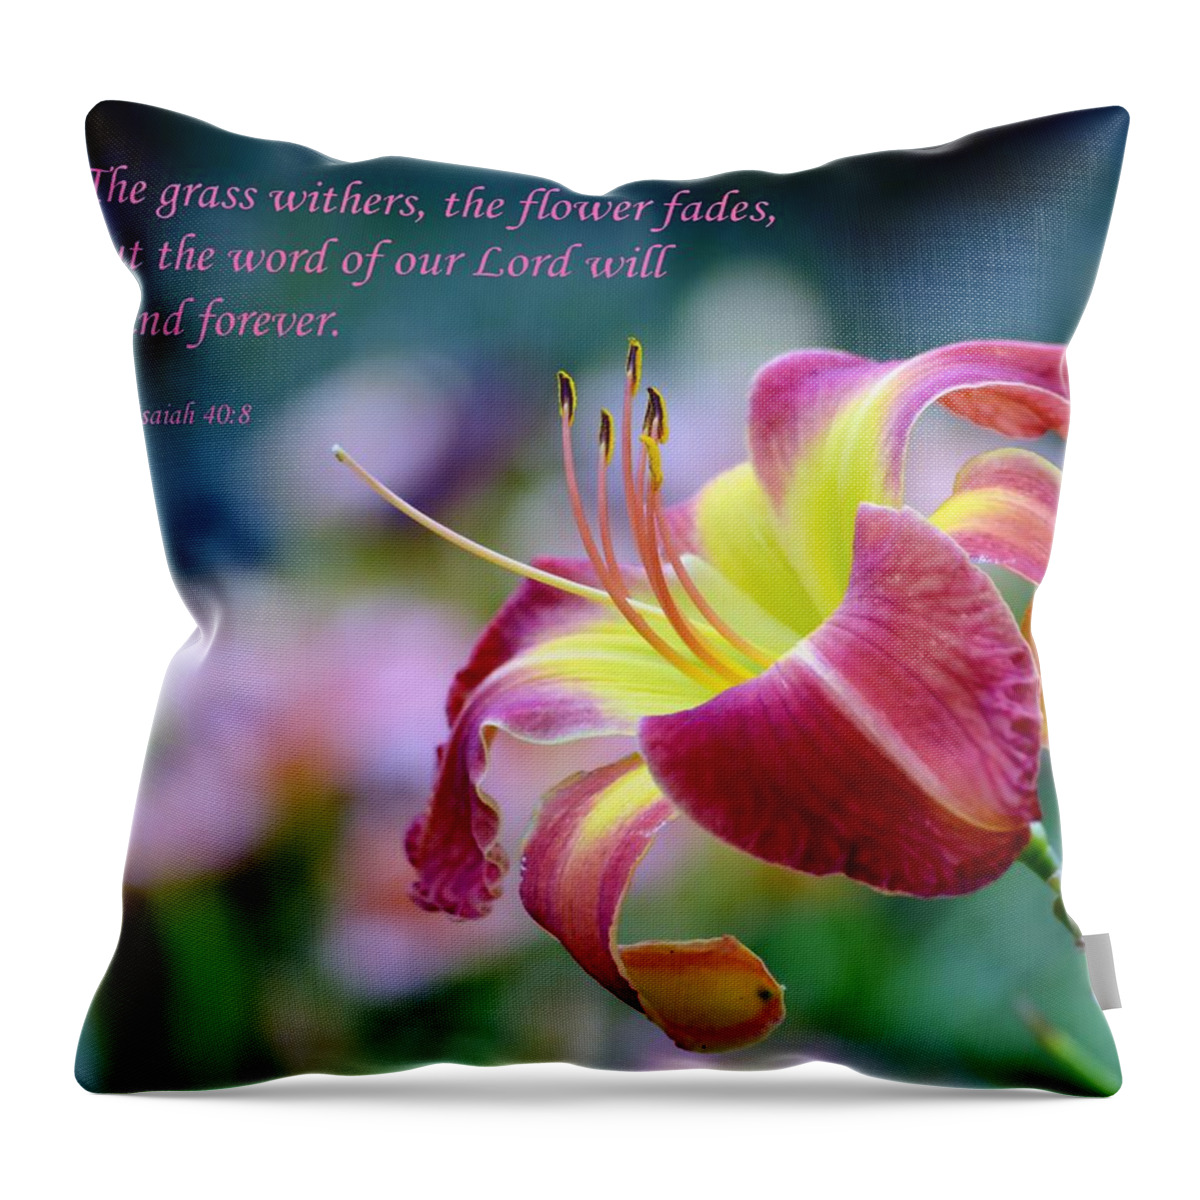 Scripture Throw Pillow featuring the photograph Isaiah 40-8 by Deena Stoddard